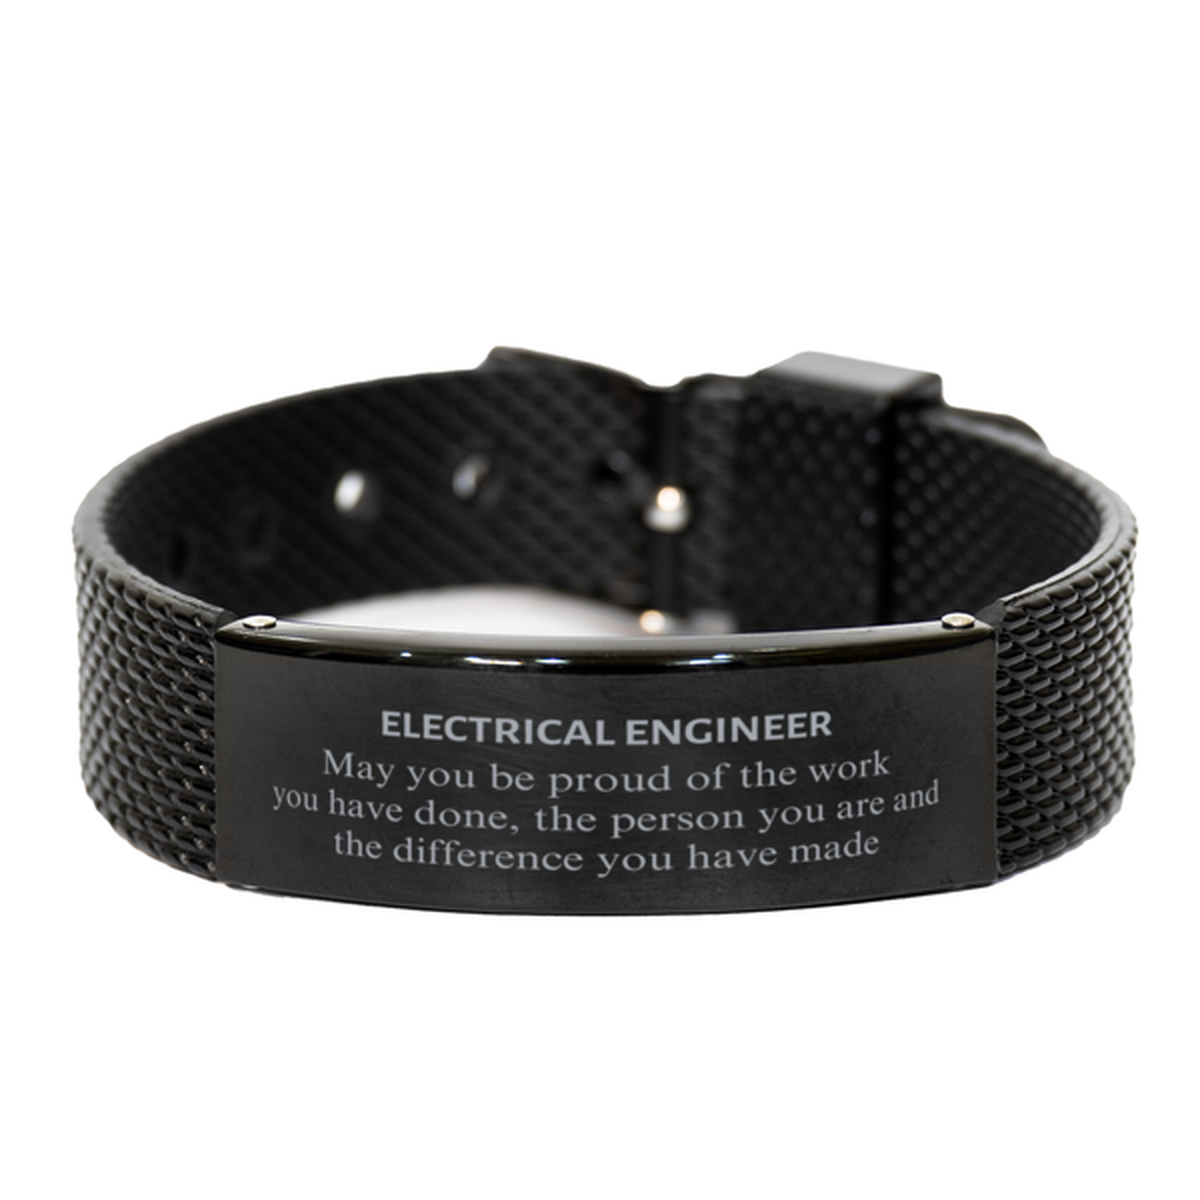 Electrical Engineer May you be proud of the work you have done, Retirement Electrical Engineer Black Shark Mesh Bracelet for Colleague Appreciation Gifts Amazing for Electrical Engineer